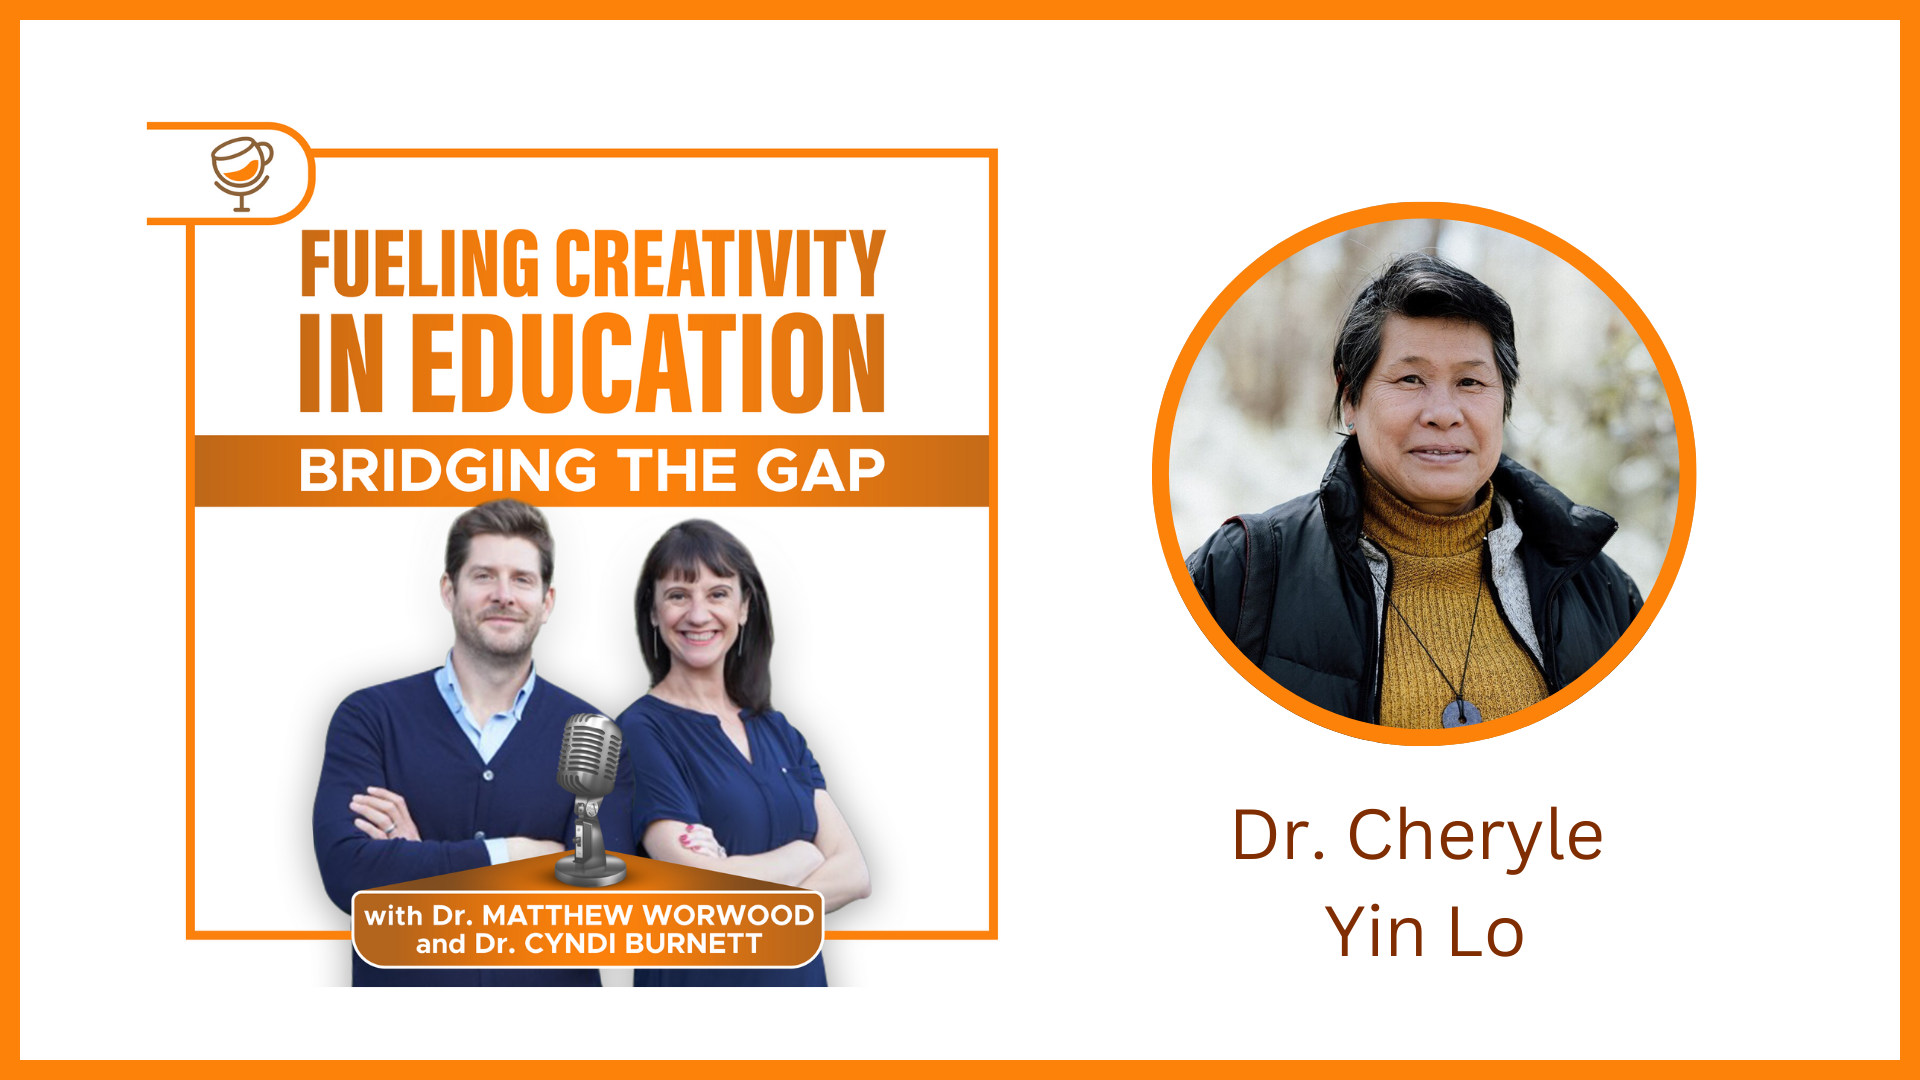 The Creativity in Art, Visualization, and Sense Making with Dr. Cheryle Yin Lo